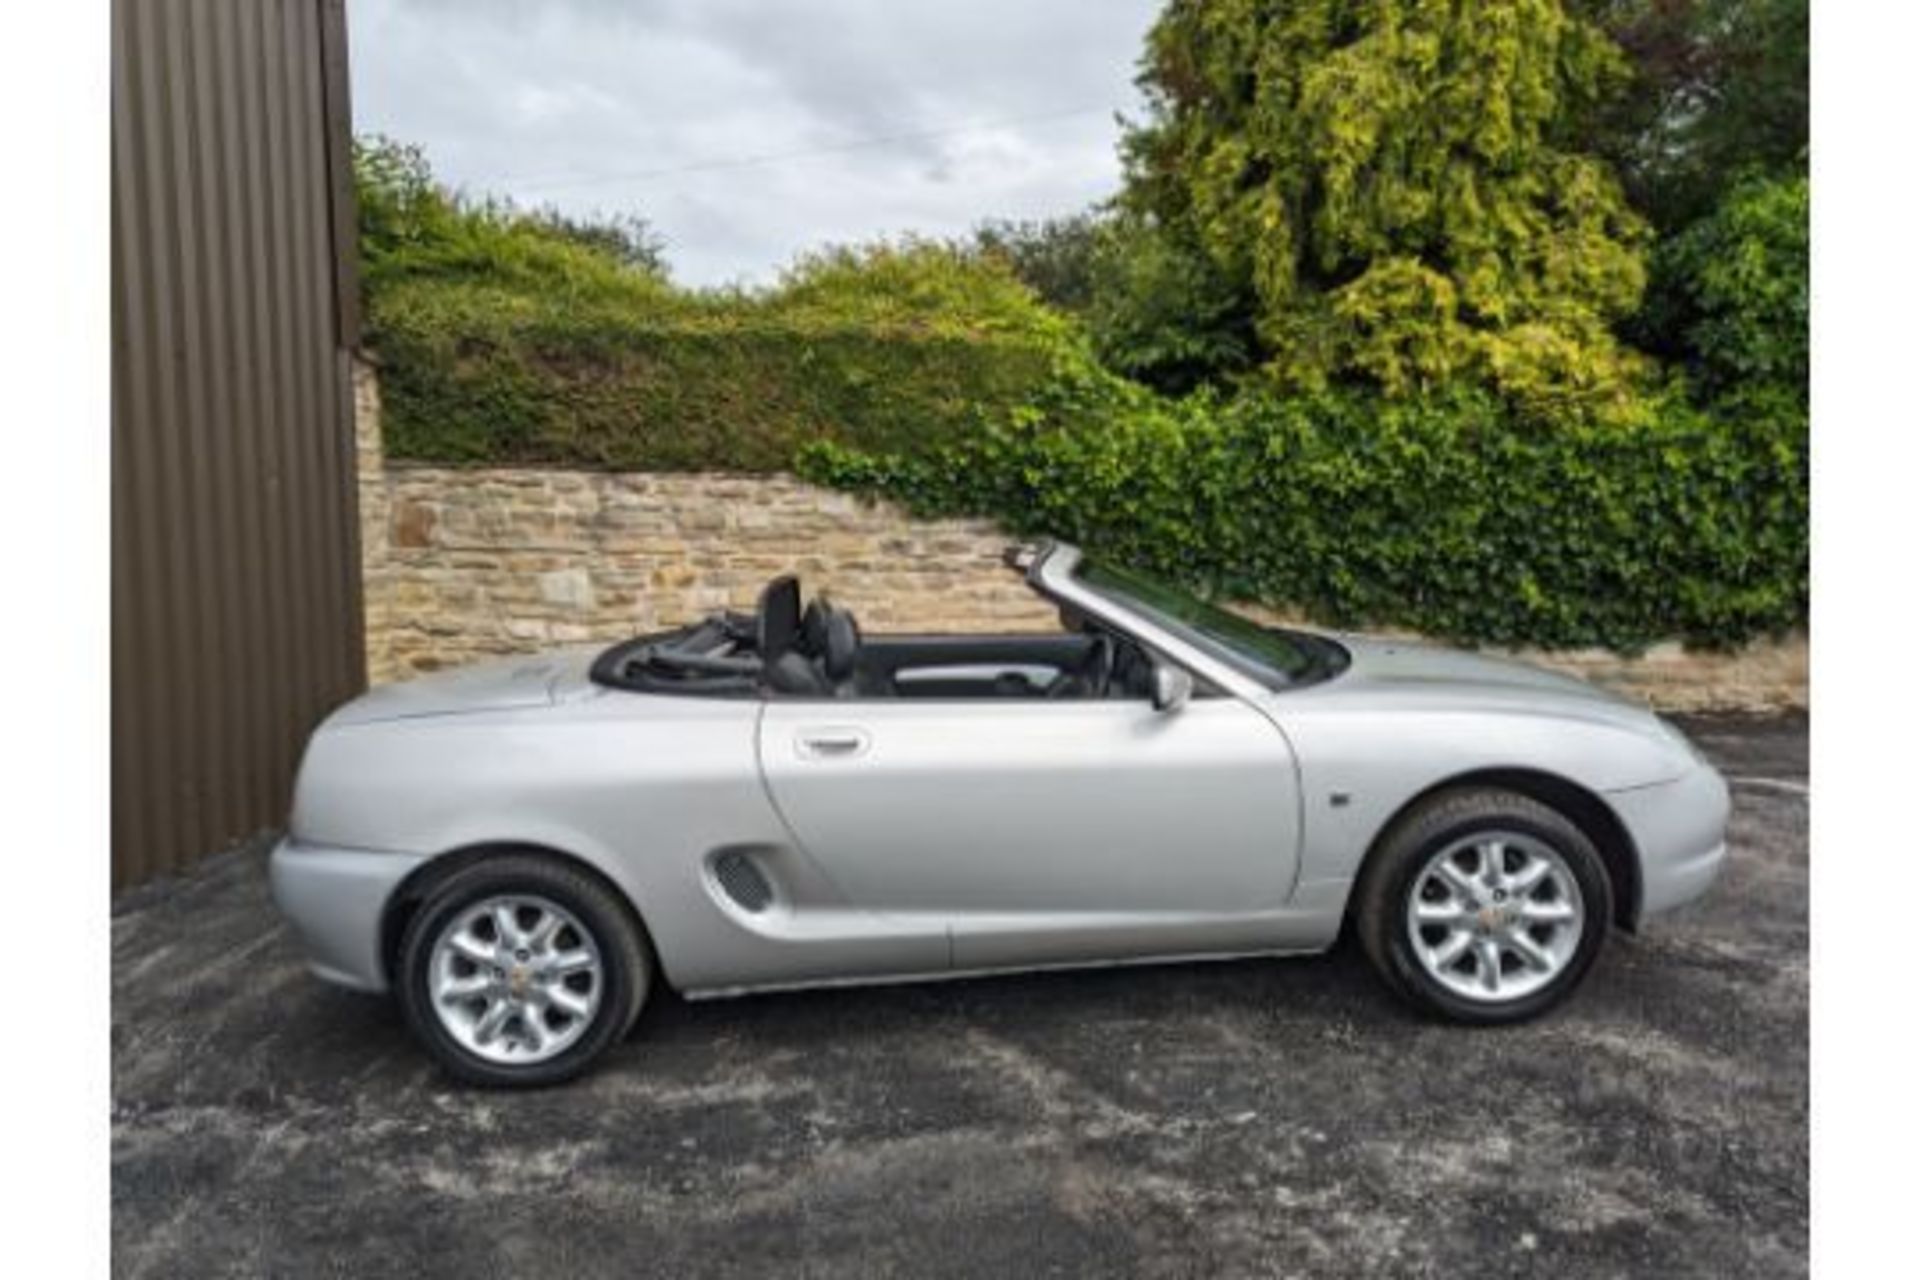 MG MGF Convertible Silver Registered Year 2000 (W Reg) 97545 Miles 1.8L, - Image 7 of 11